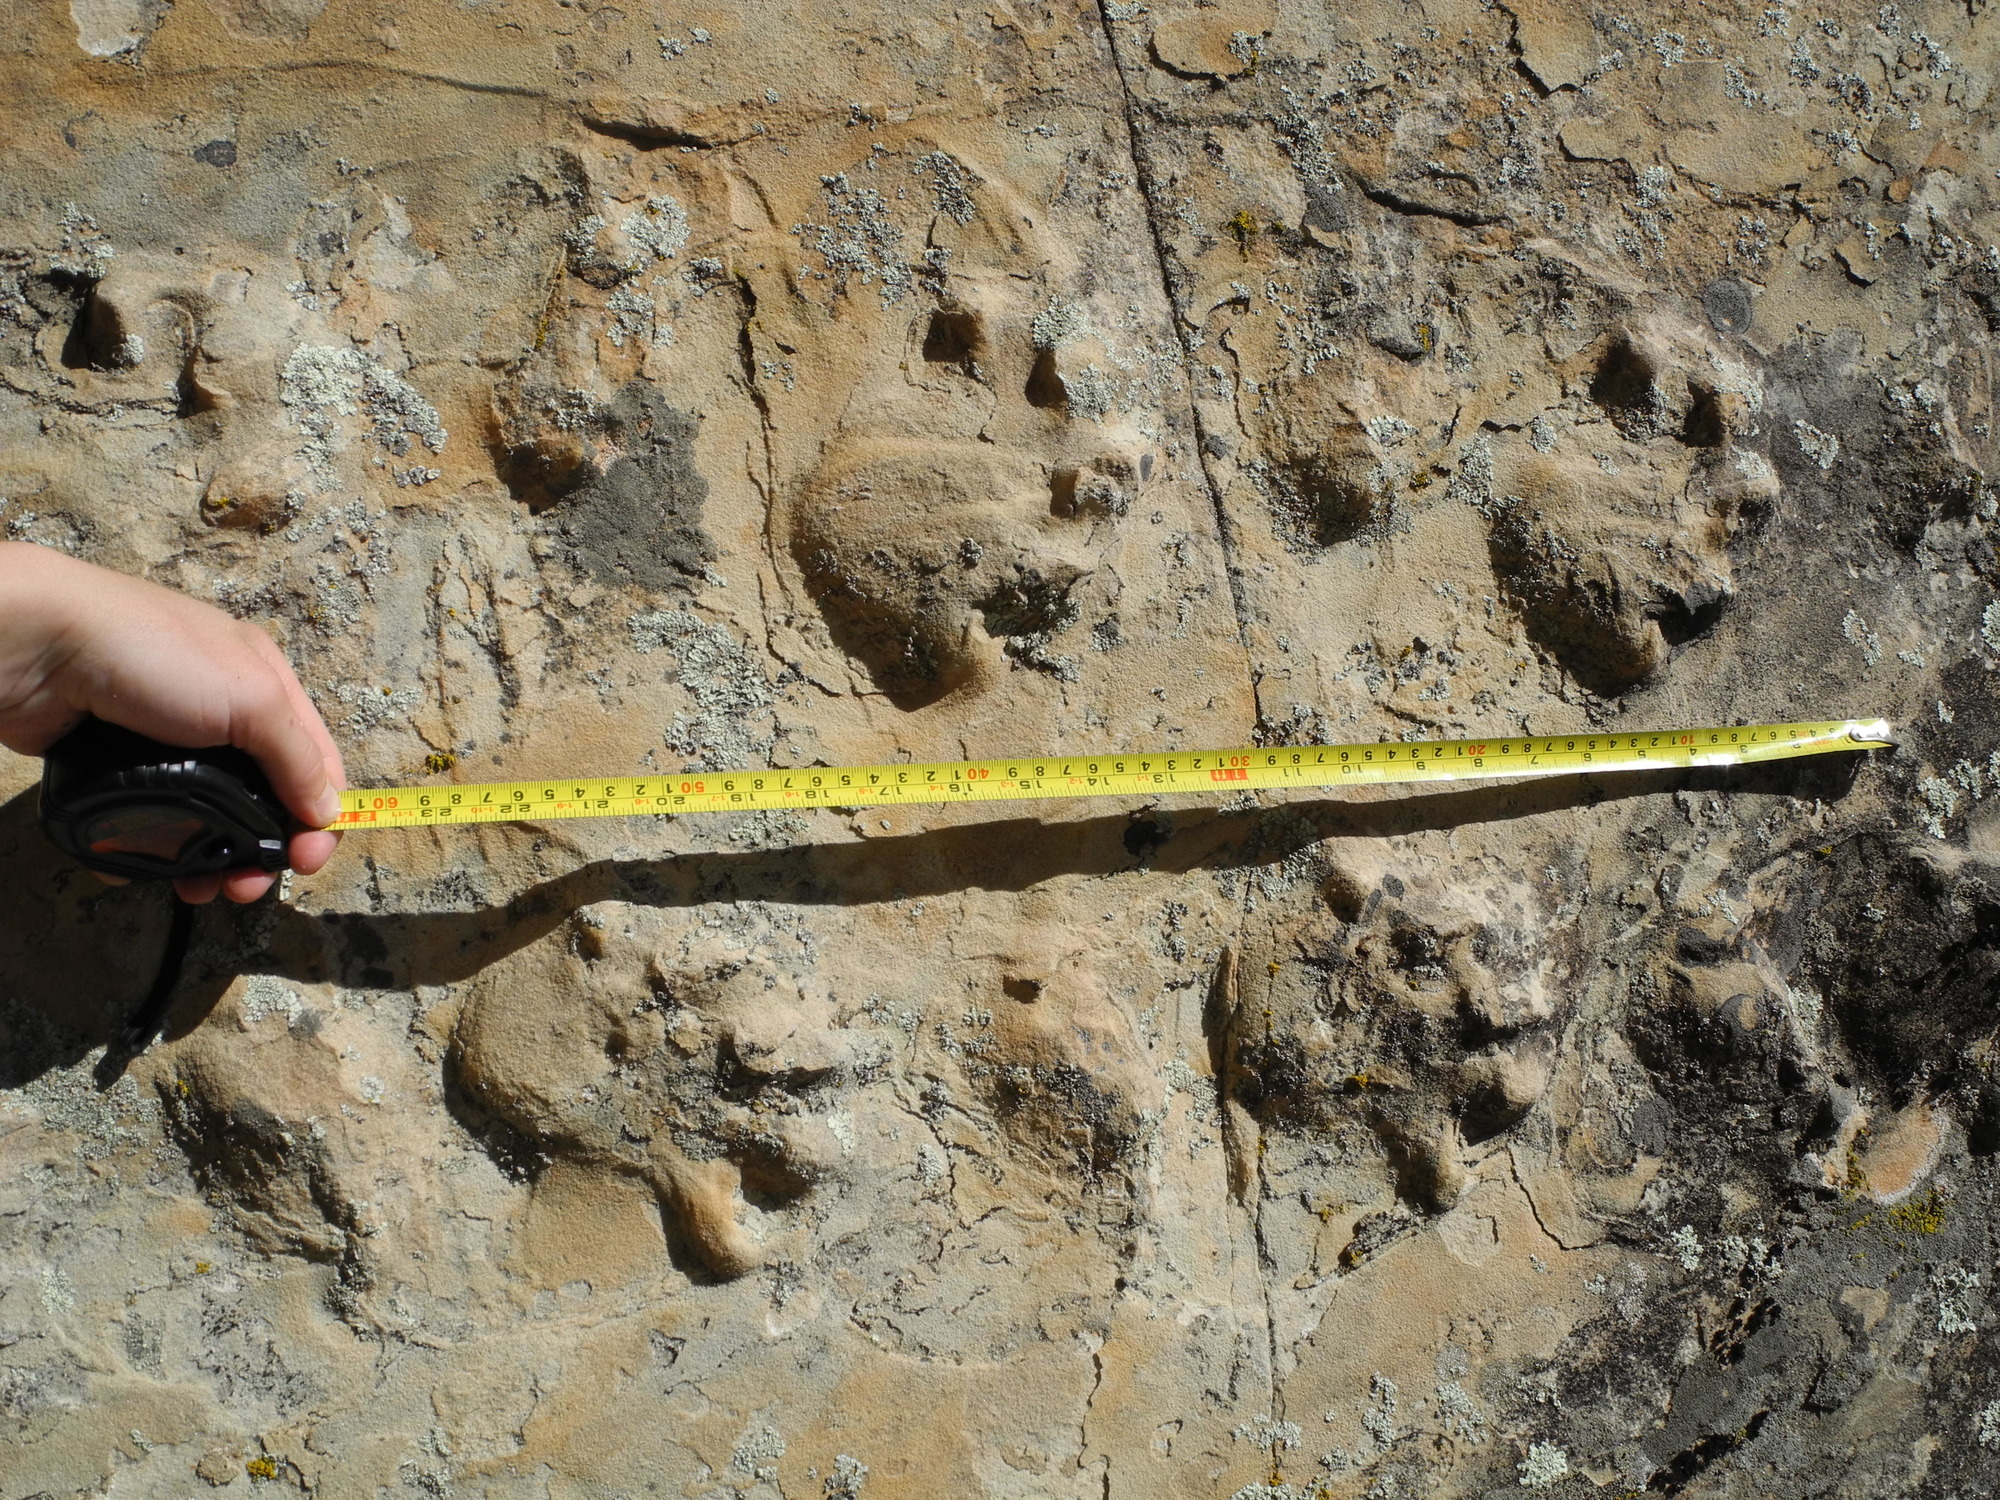 several raised tracks with foot and toe prints go across the rock horizontally. A ruler spreads across the tracks.